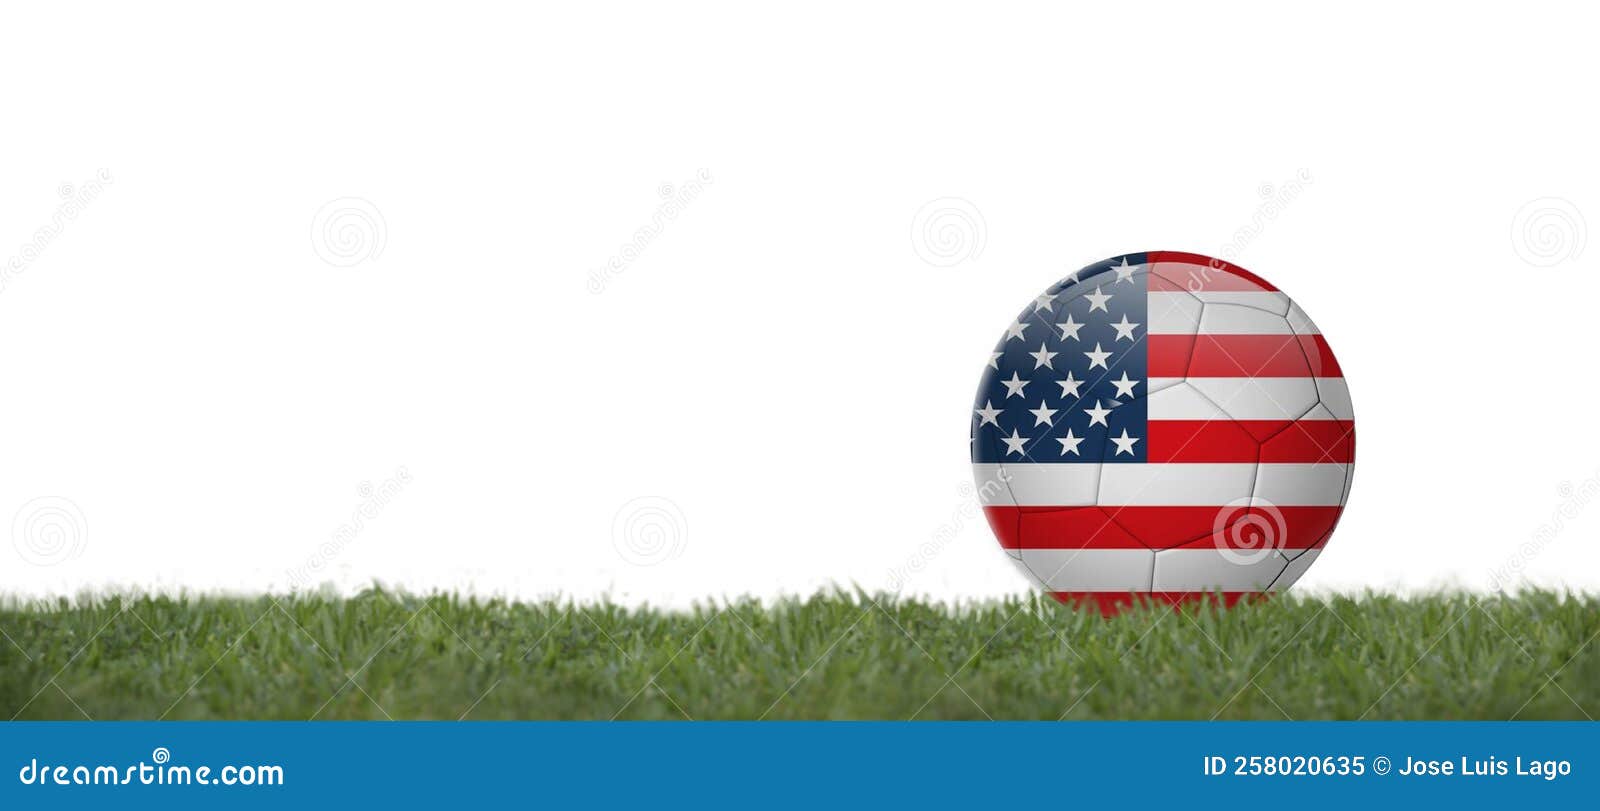 soccer ball with ee.uu flag on grass, copy space with white background